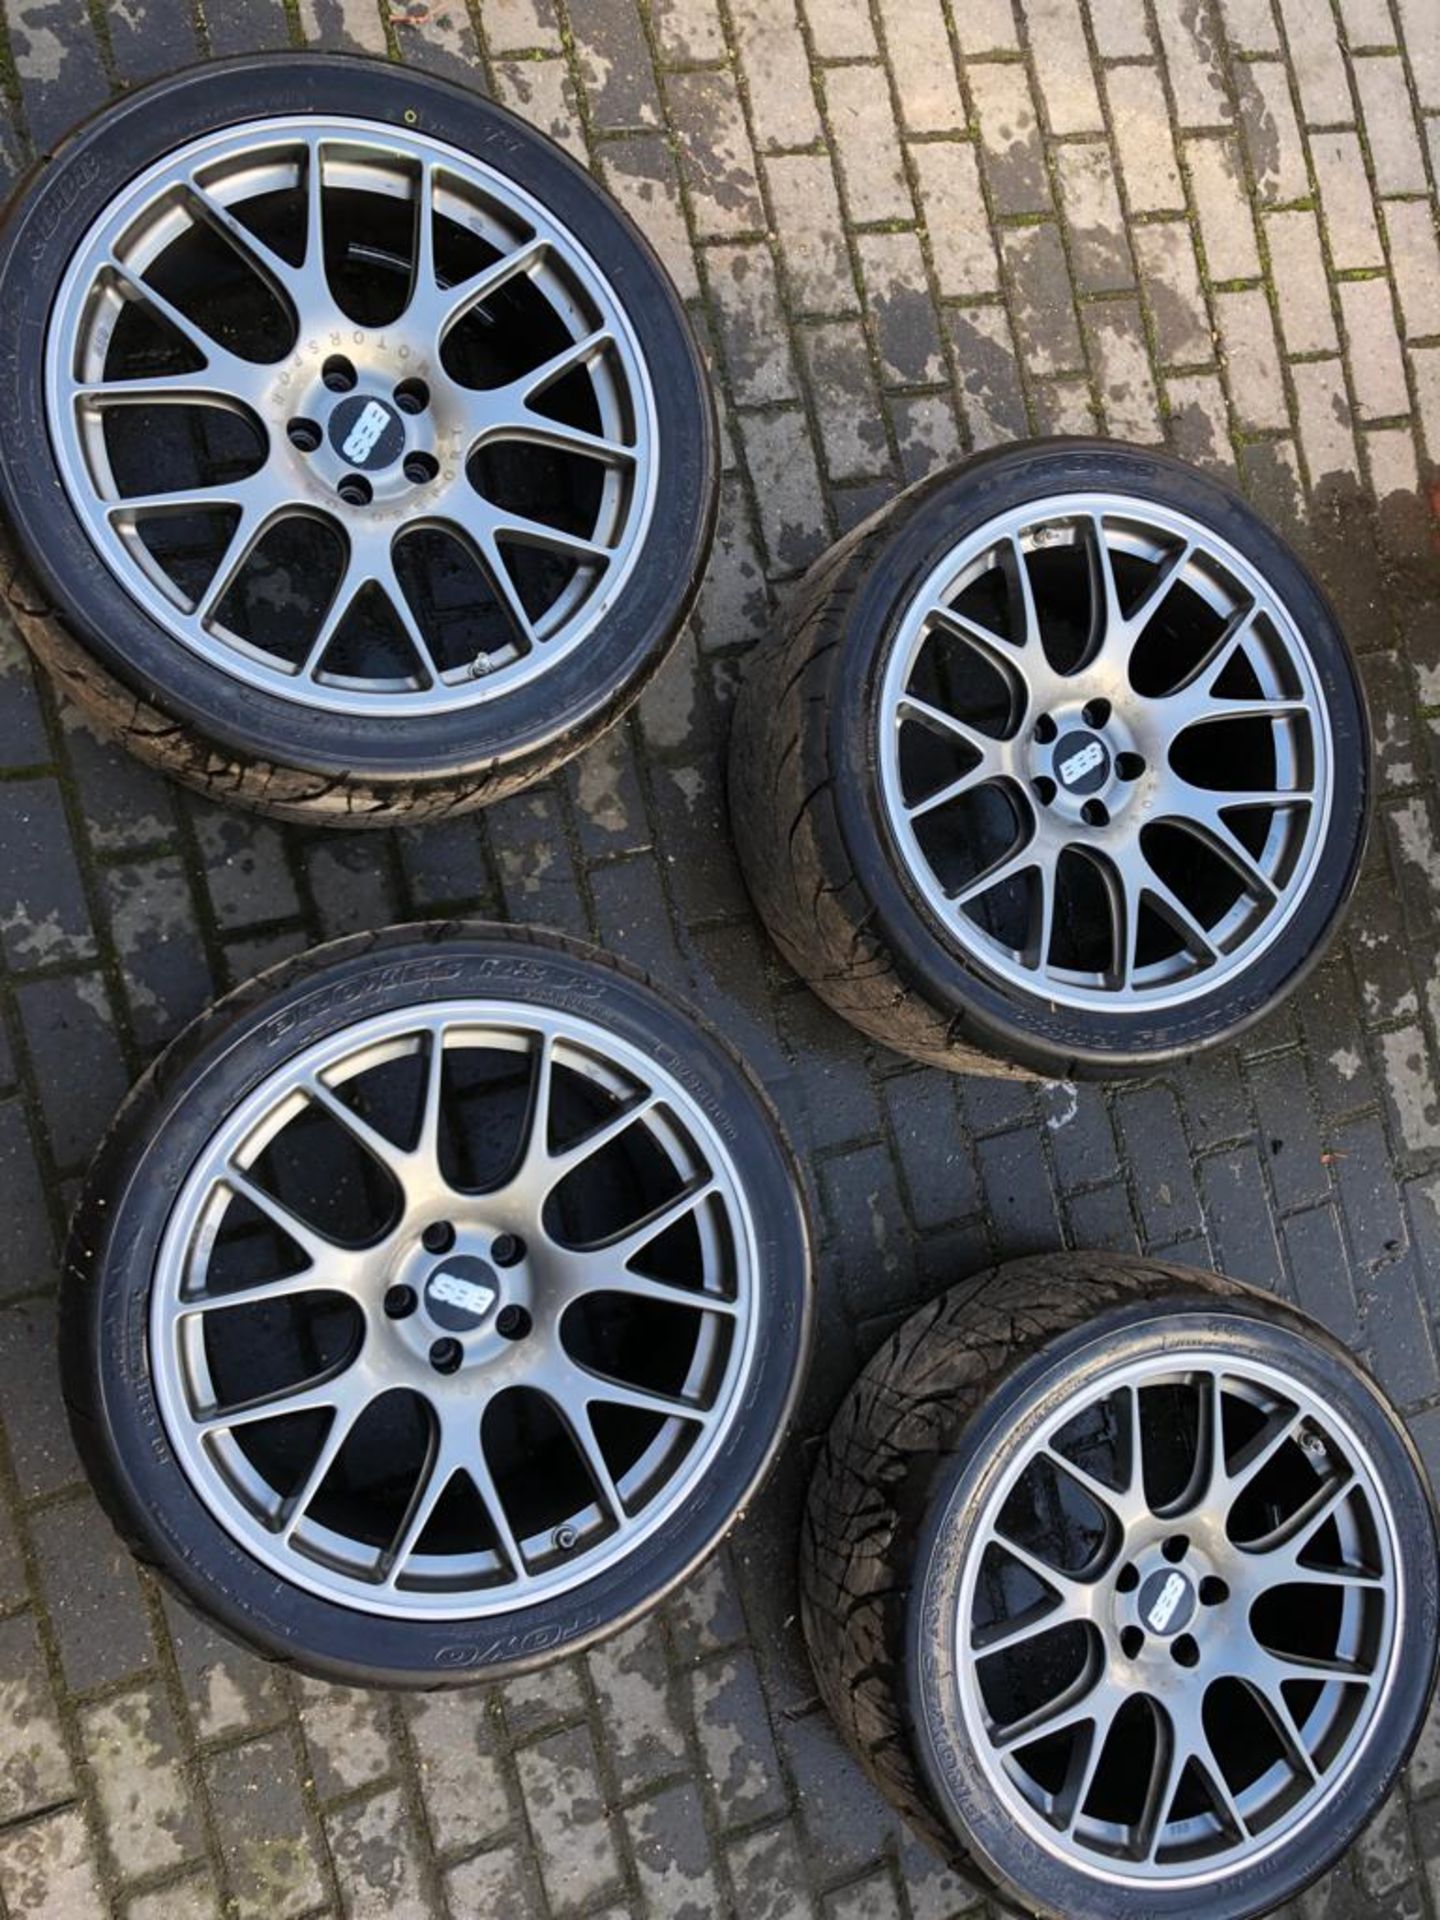 GENUINE BBS CH-R 20" SATIN ANTHRACITE NÜRBURGRING ALLOY WHEELS SET OF 4, TOYO R888 TYRES £3400 NEW - Image 17 of 17